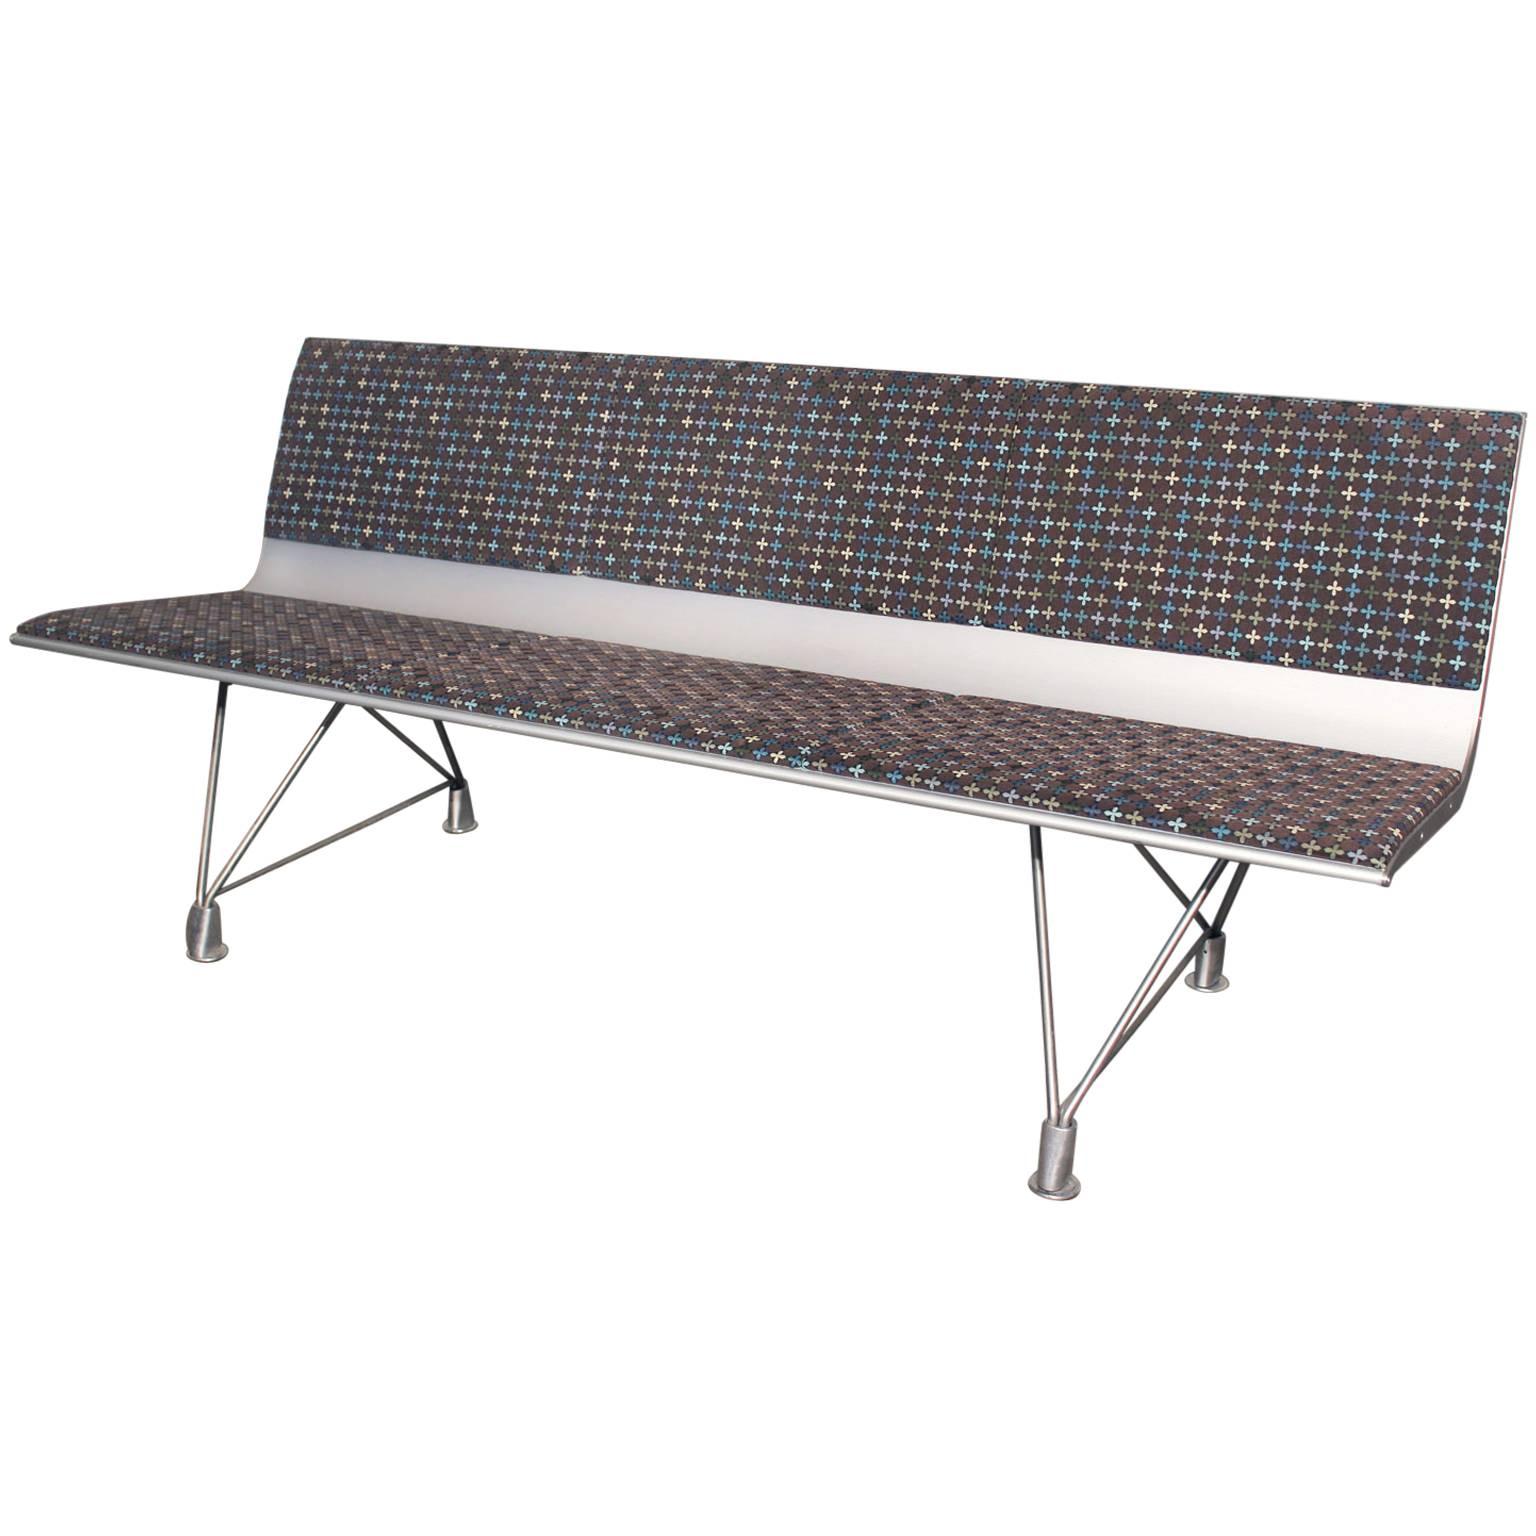 Aero Aluminum Bench from Davis Furniture by Lievore Altherr Molina and Sellex